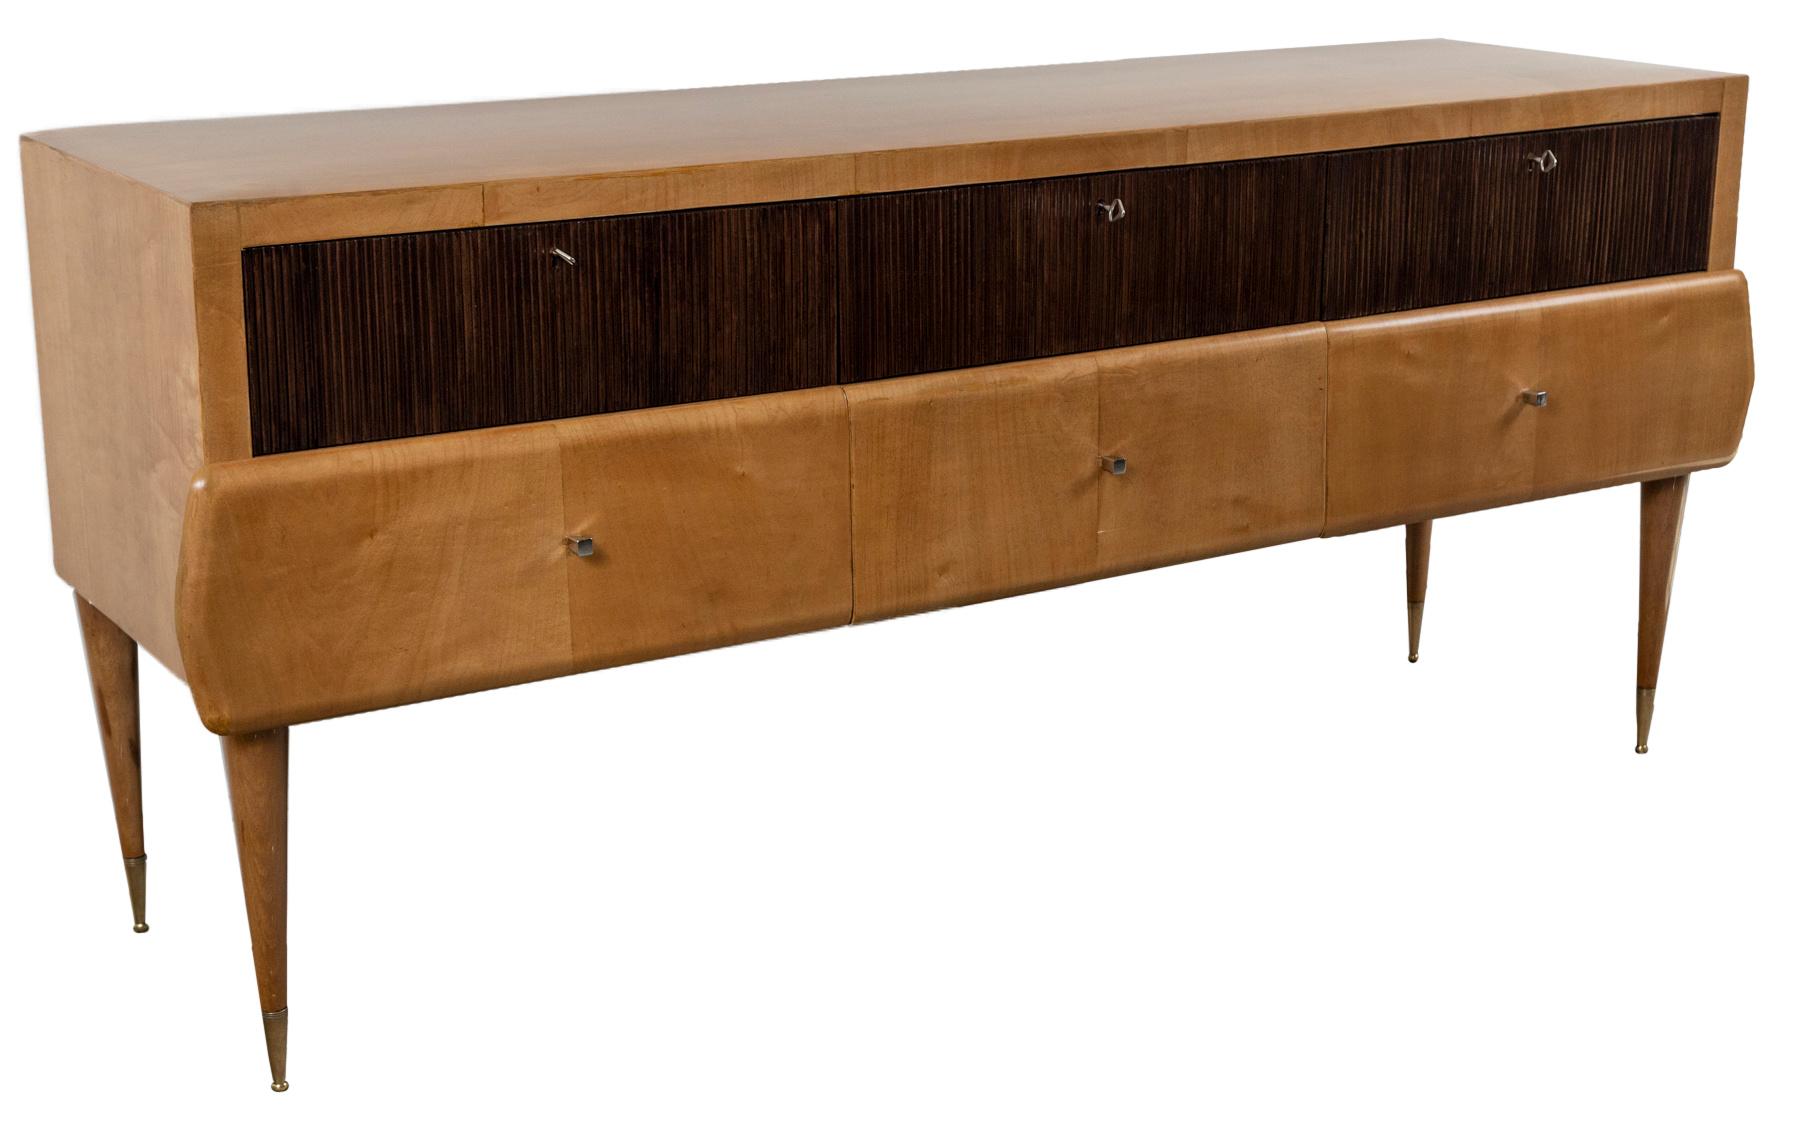 A unique maple sideboard composed of six drawers with the top three drawers adorned with reeded fronts in walnut and finishing in straight rounded and tapered legs with high brass sabots and shown with its original keys. Note overlapping modeled